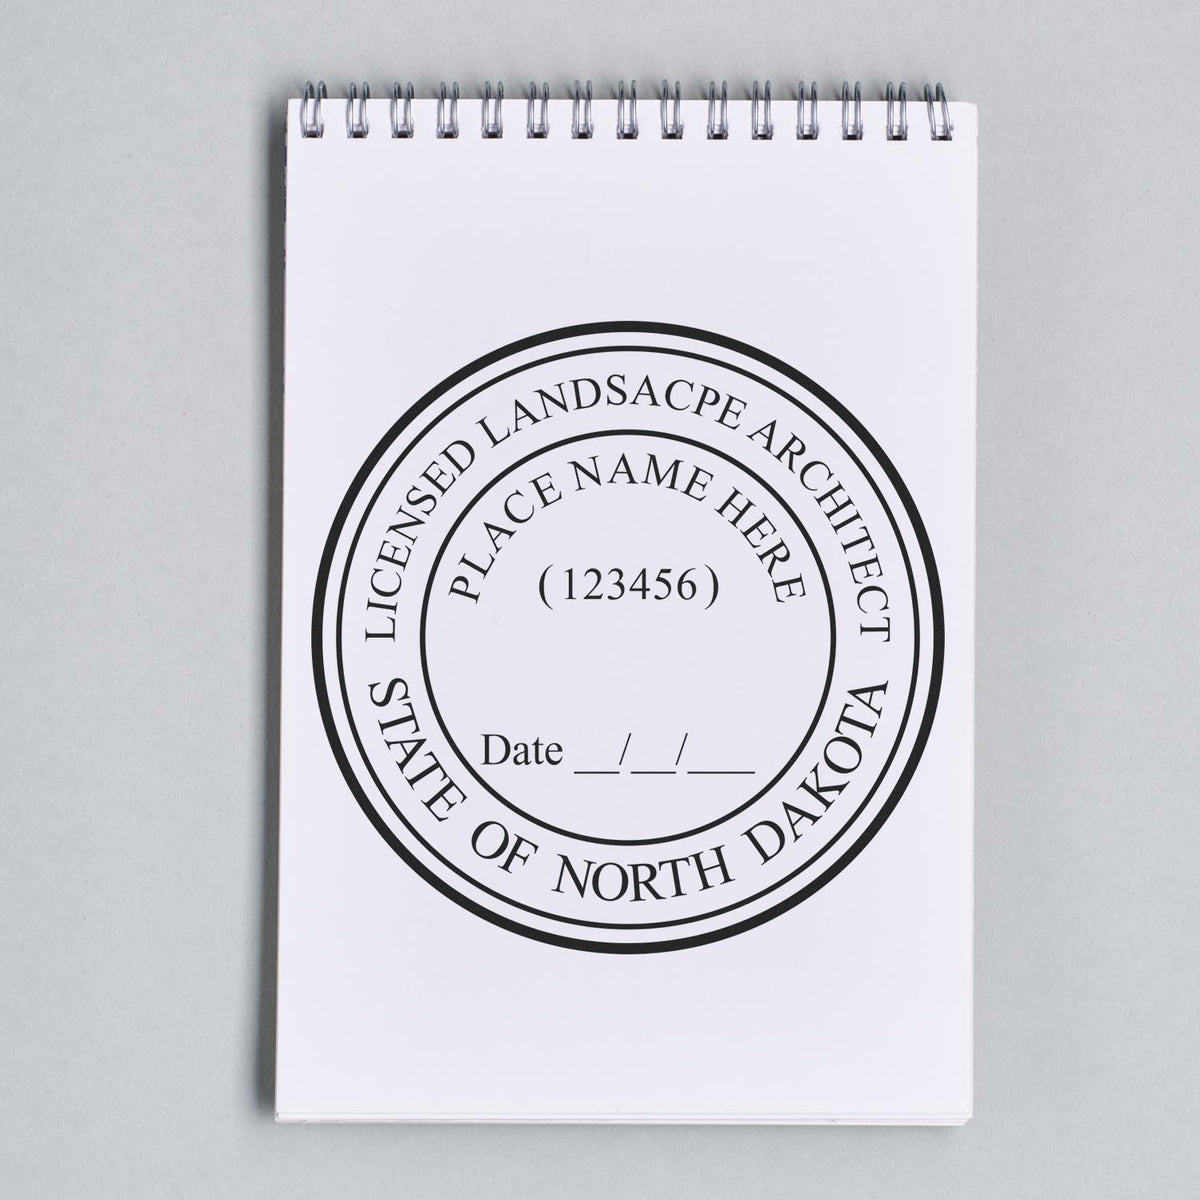 A stamped impression of the Self-Inking North Dakota Landscape Architect Stamp in this stylish lifestyle photo, setting the tone for a unique and personalized product.